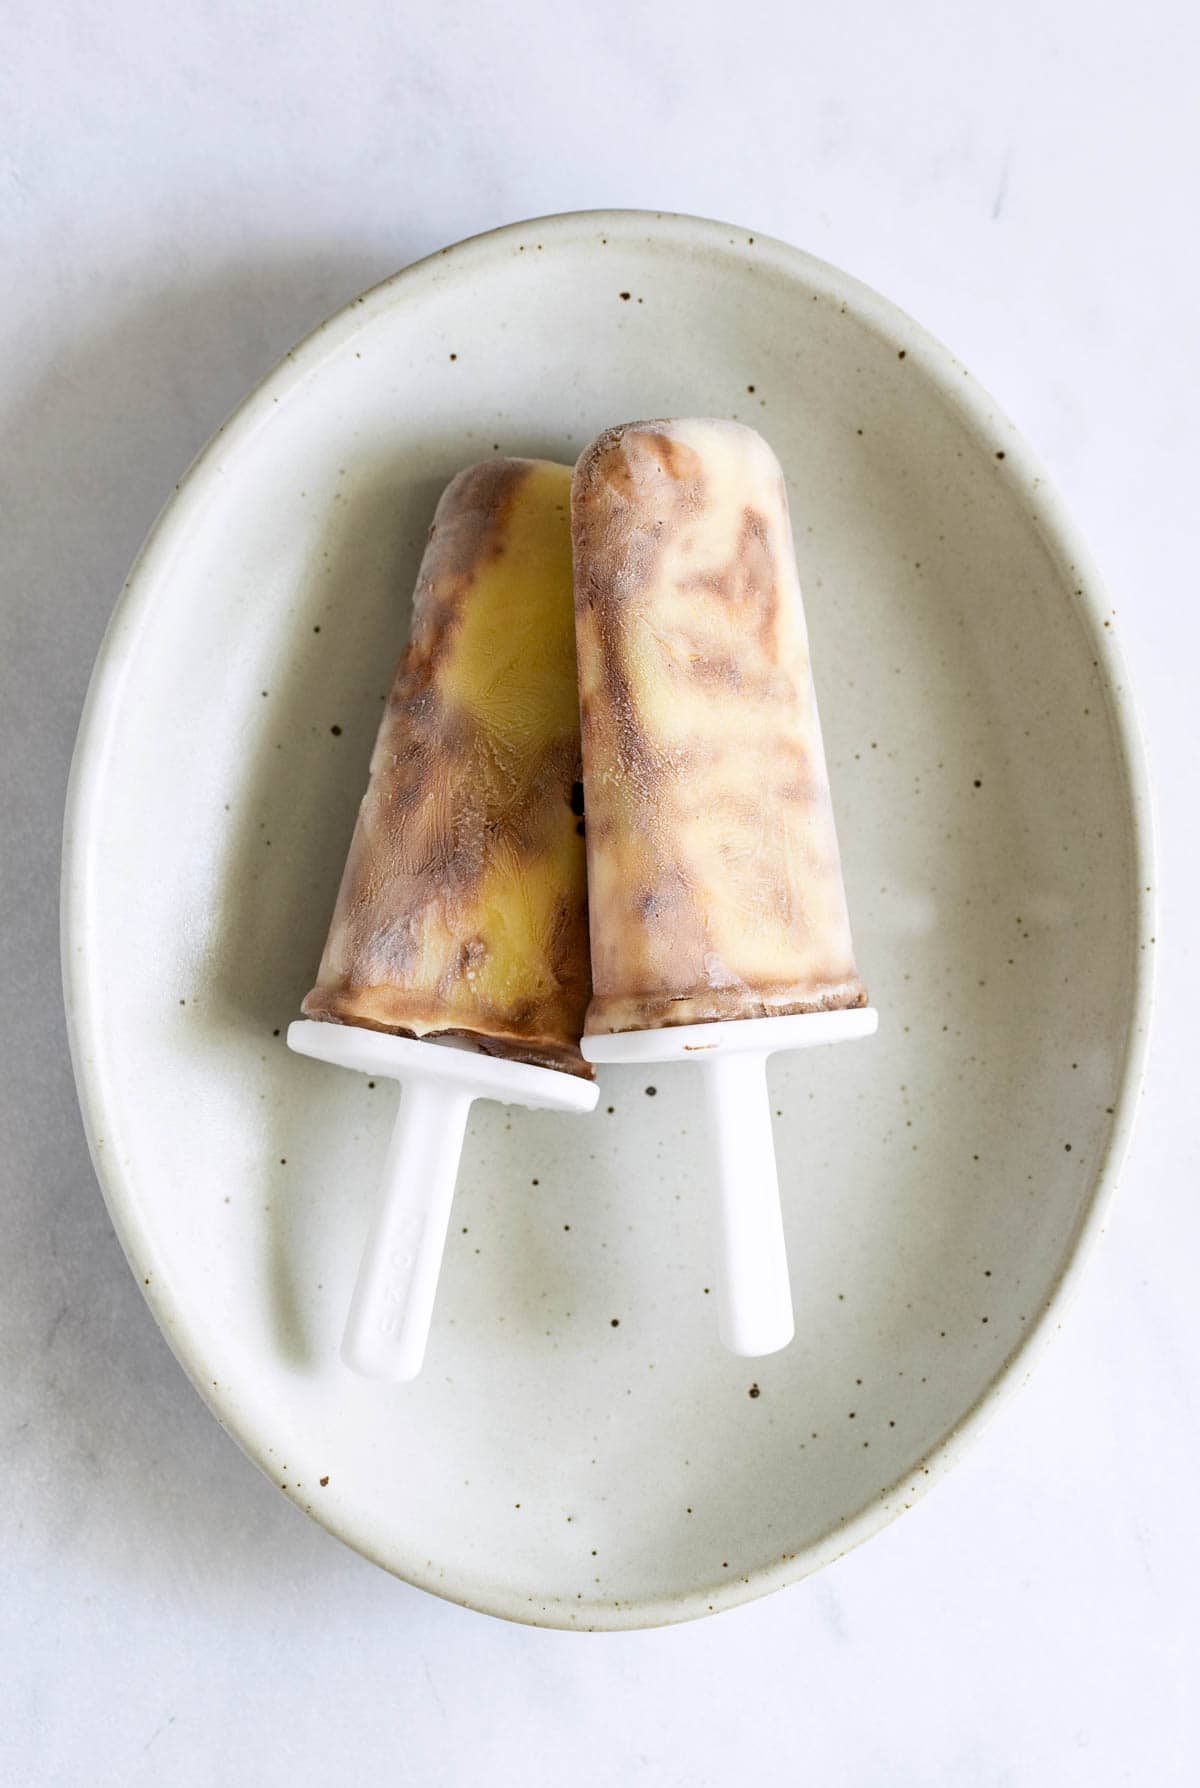 Two popsicles with a marbled pattern of cream and chocolate placed on a white plate.